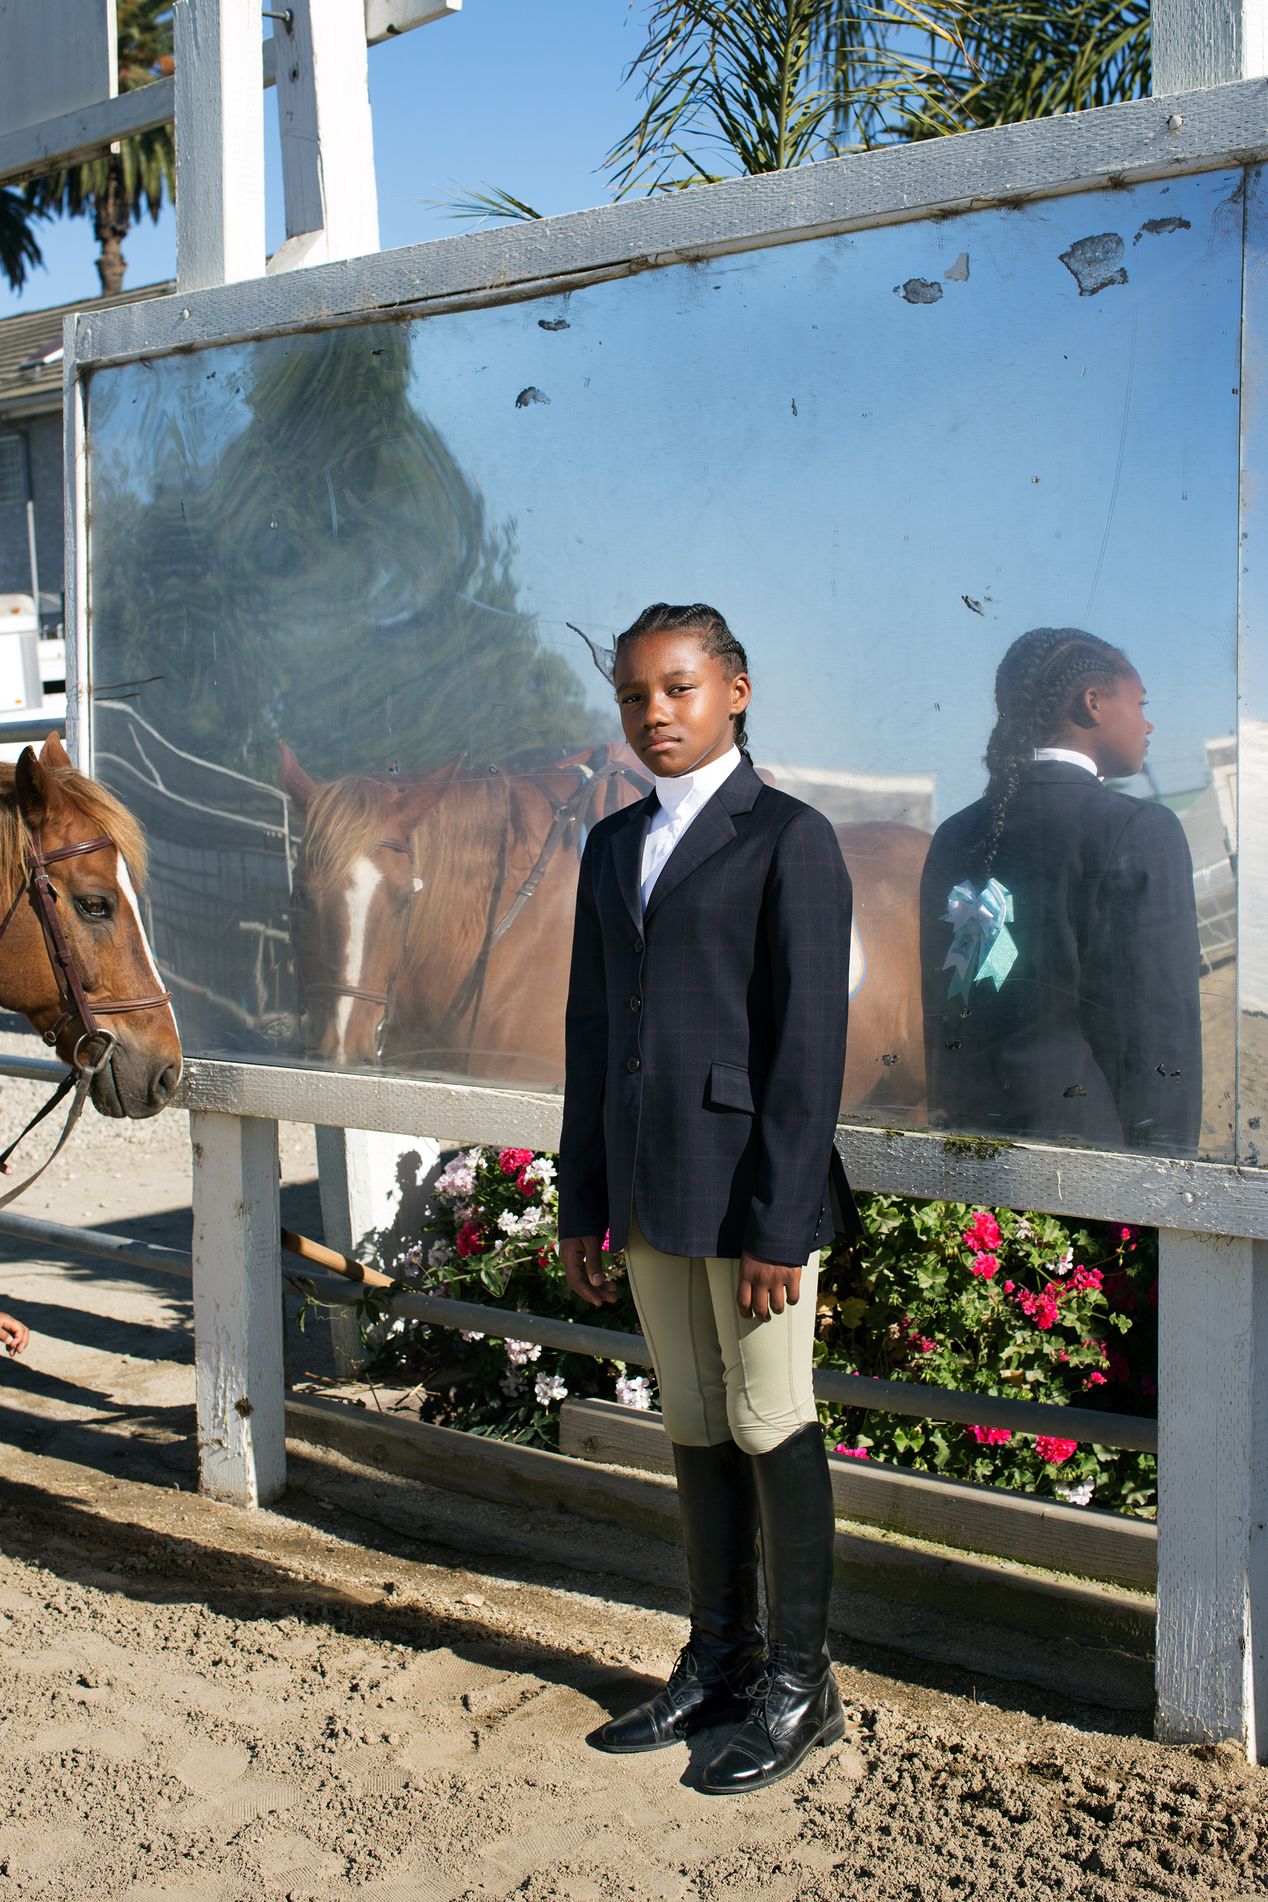 Young female equestrian at an arena, Ilona Szwarc, editorial photographer in Los Angeles. 